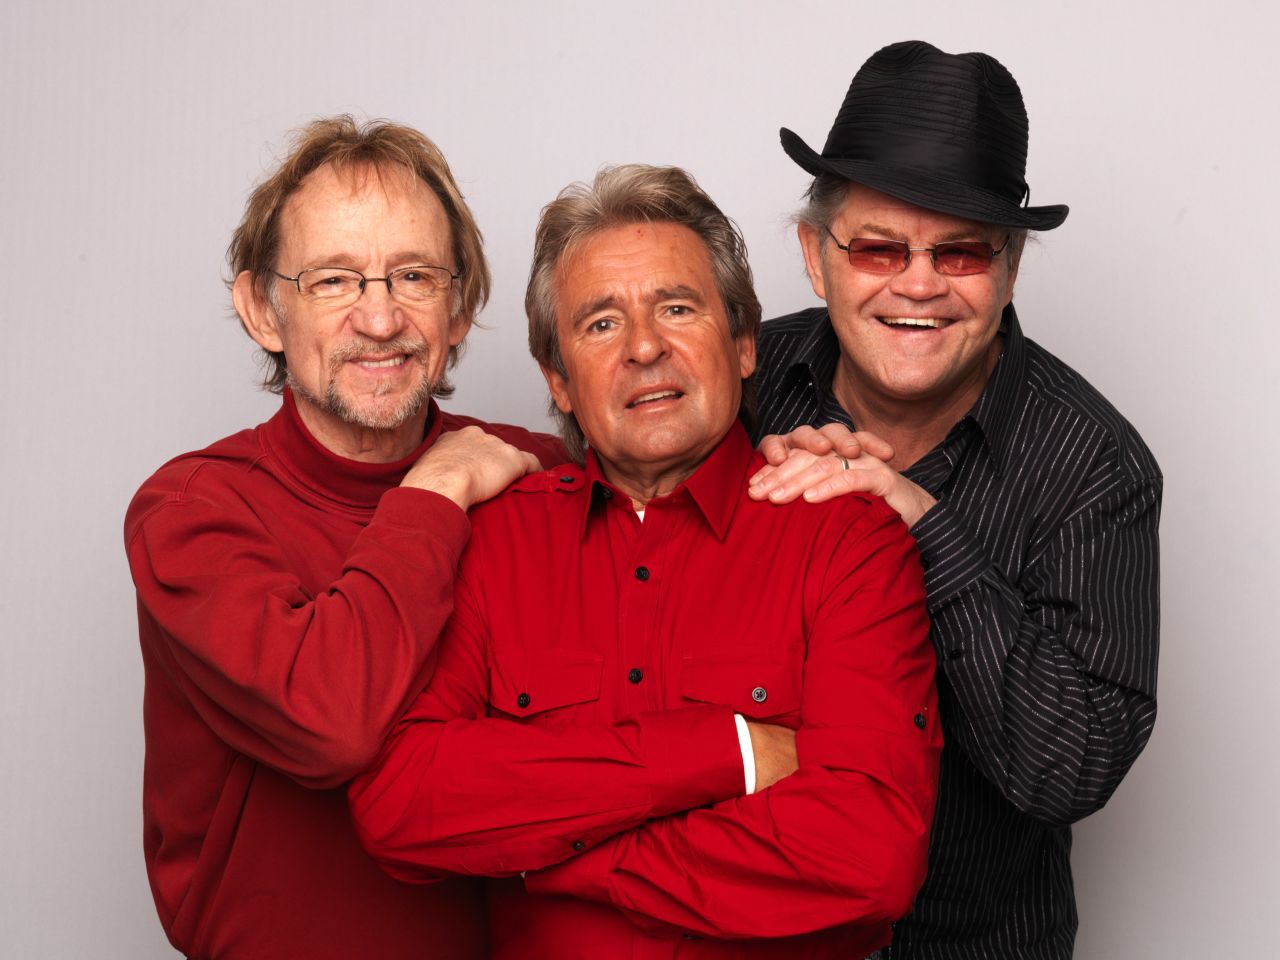 Tork, from left, Jones and Dolenz pose during a portrait session to announce the band's 45th anniversary tour  in London in 2011.